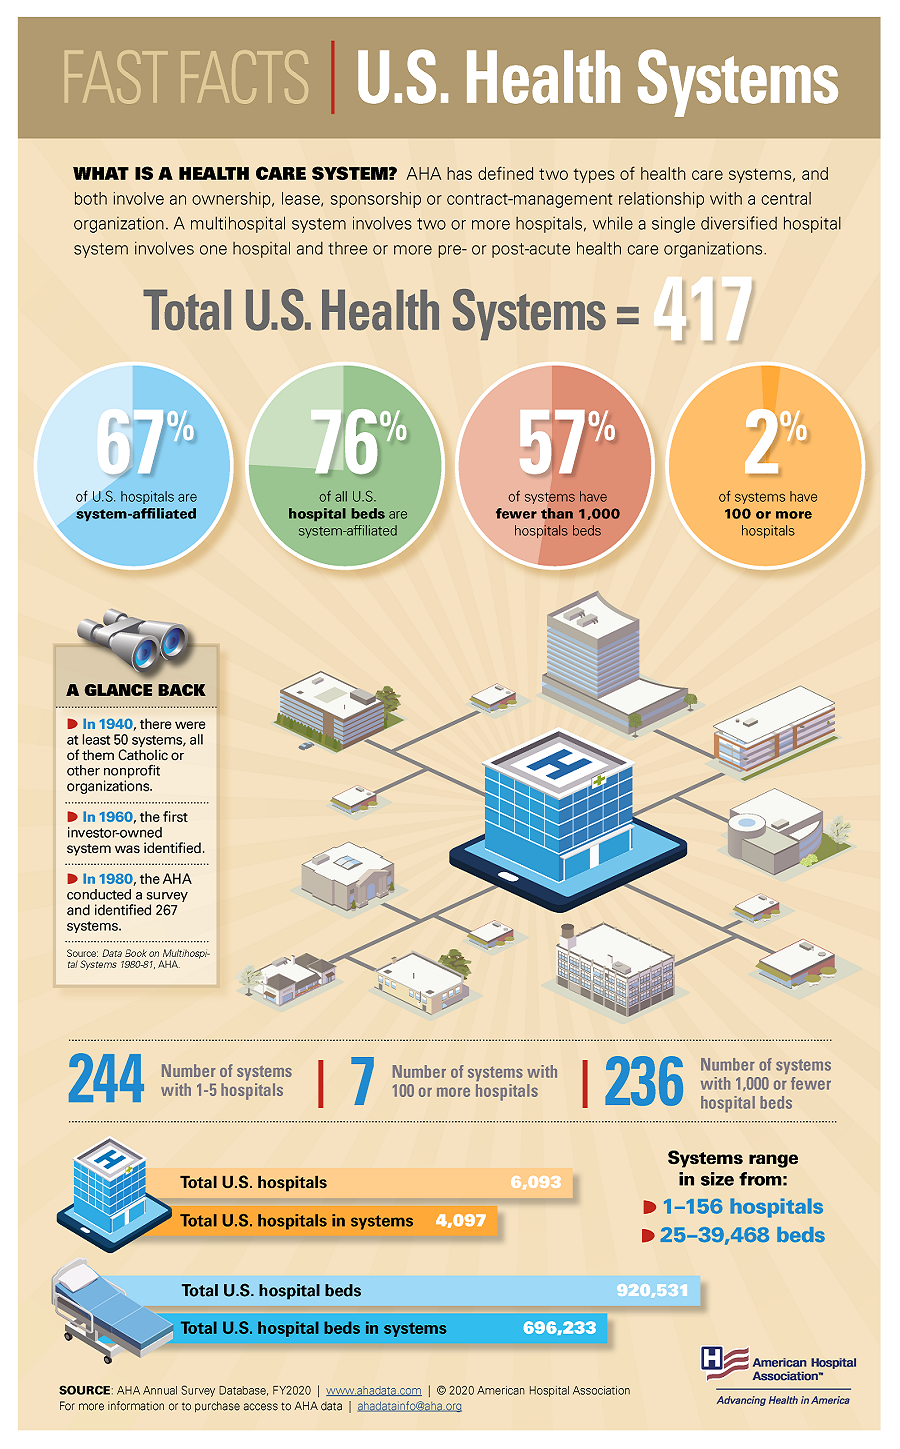 Fast Facts: U.S. Health Systems 2022. What is a health care system? AHA has defined two types of health care systems, and both involve an ownership, lease, sponsorship or contract-management relationship with a central organization. A multihospital system involves two or more hospitals, while a single diversified hospital system involves one hospital and three or more pre- or post-acute health care organizations. Total U.S. Health Systems = 417. 67% of U.S. hospitals are system-affiliated.